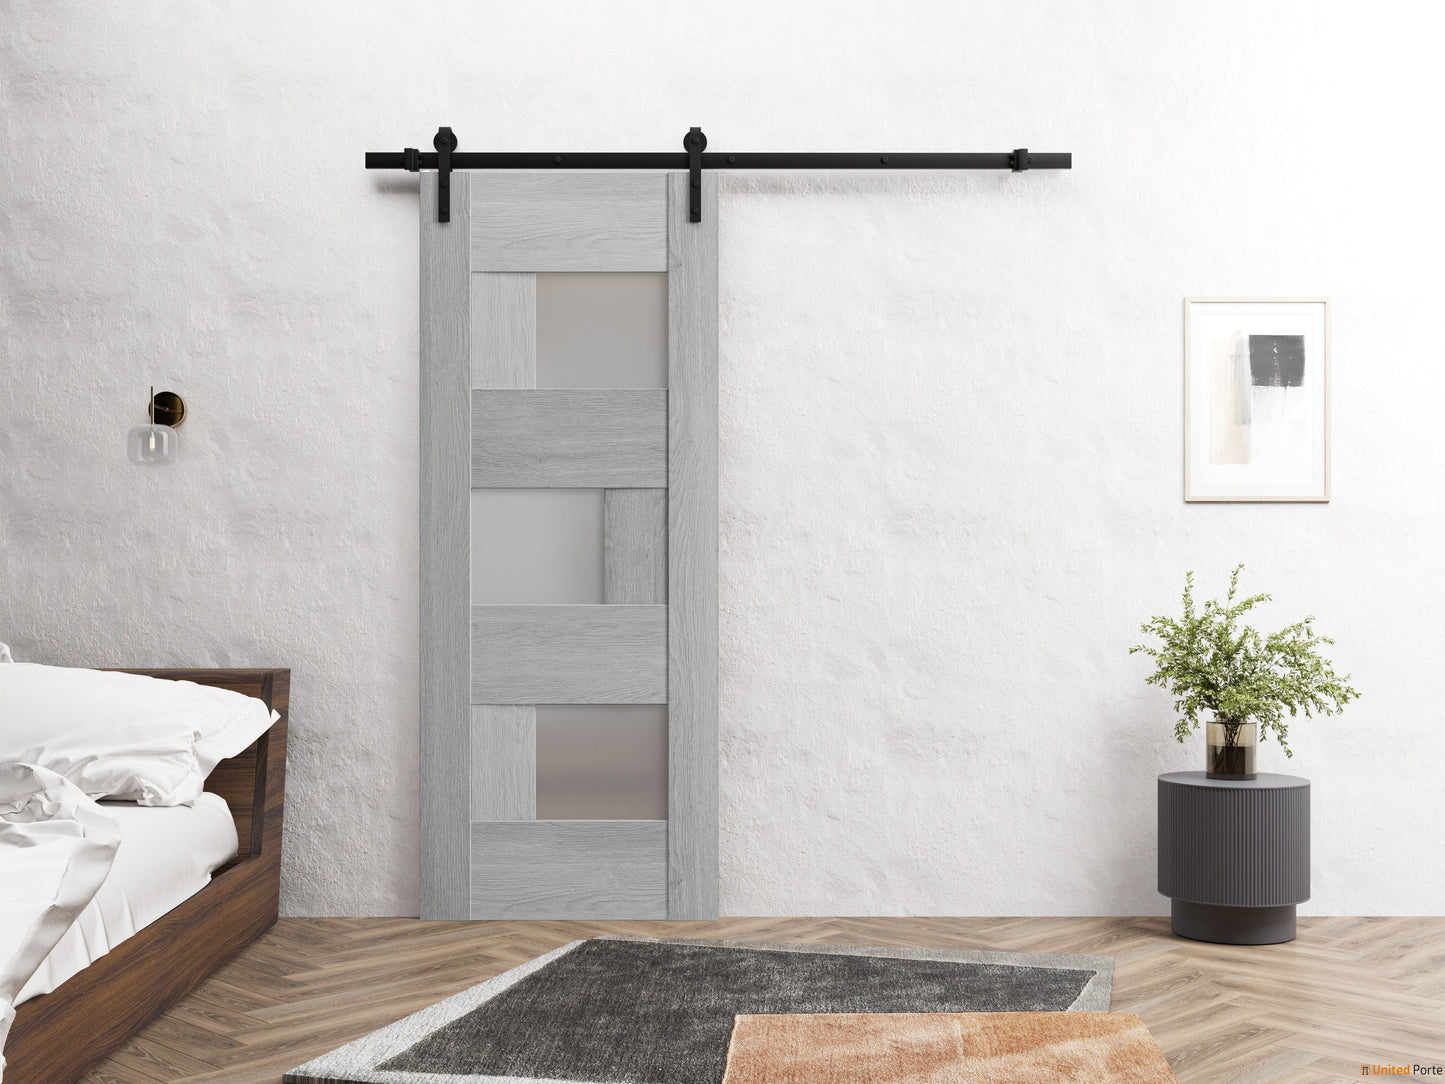 Sete 6933 Light Grey Oak Barn Door with Frosted Glass and Black Rail